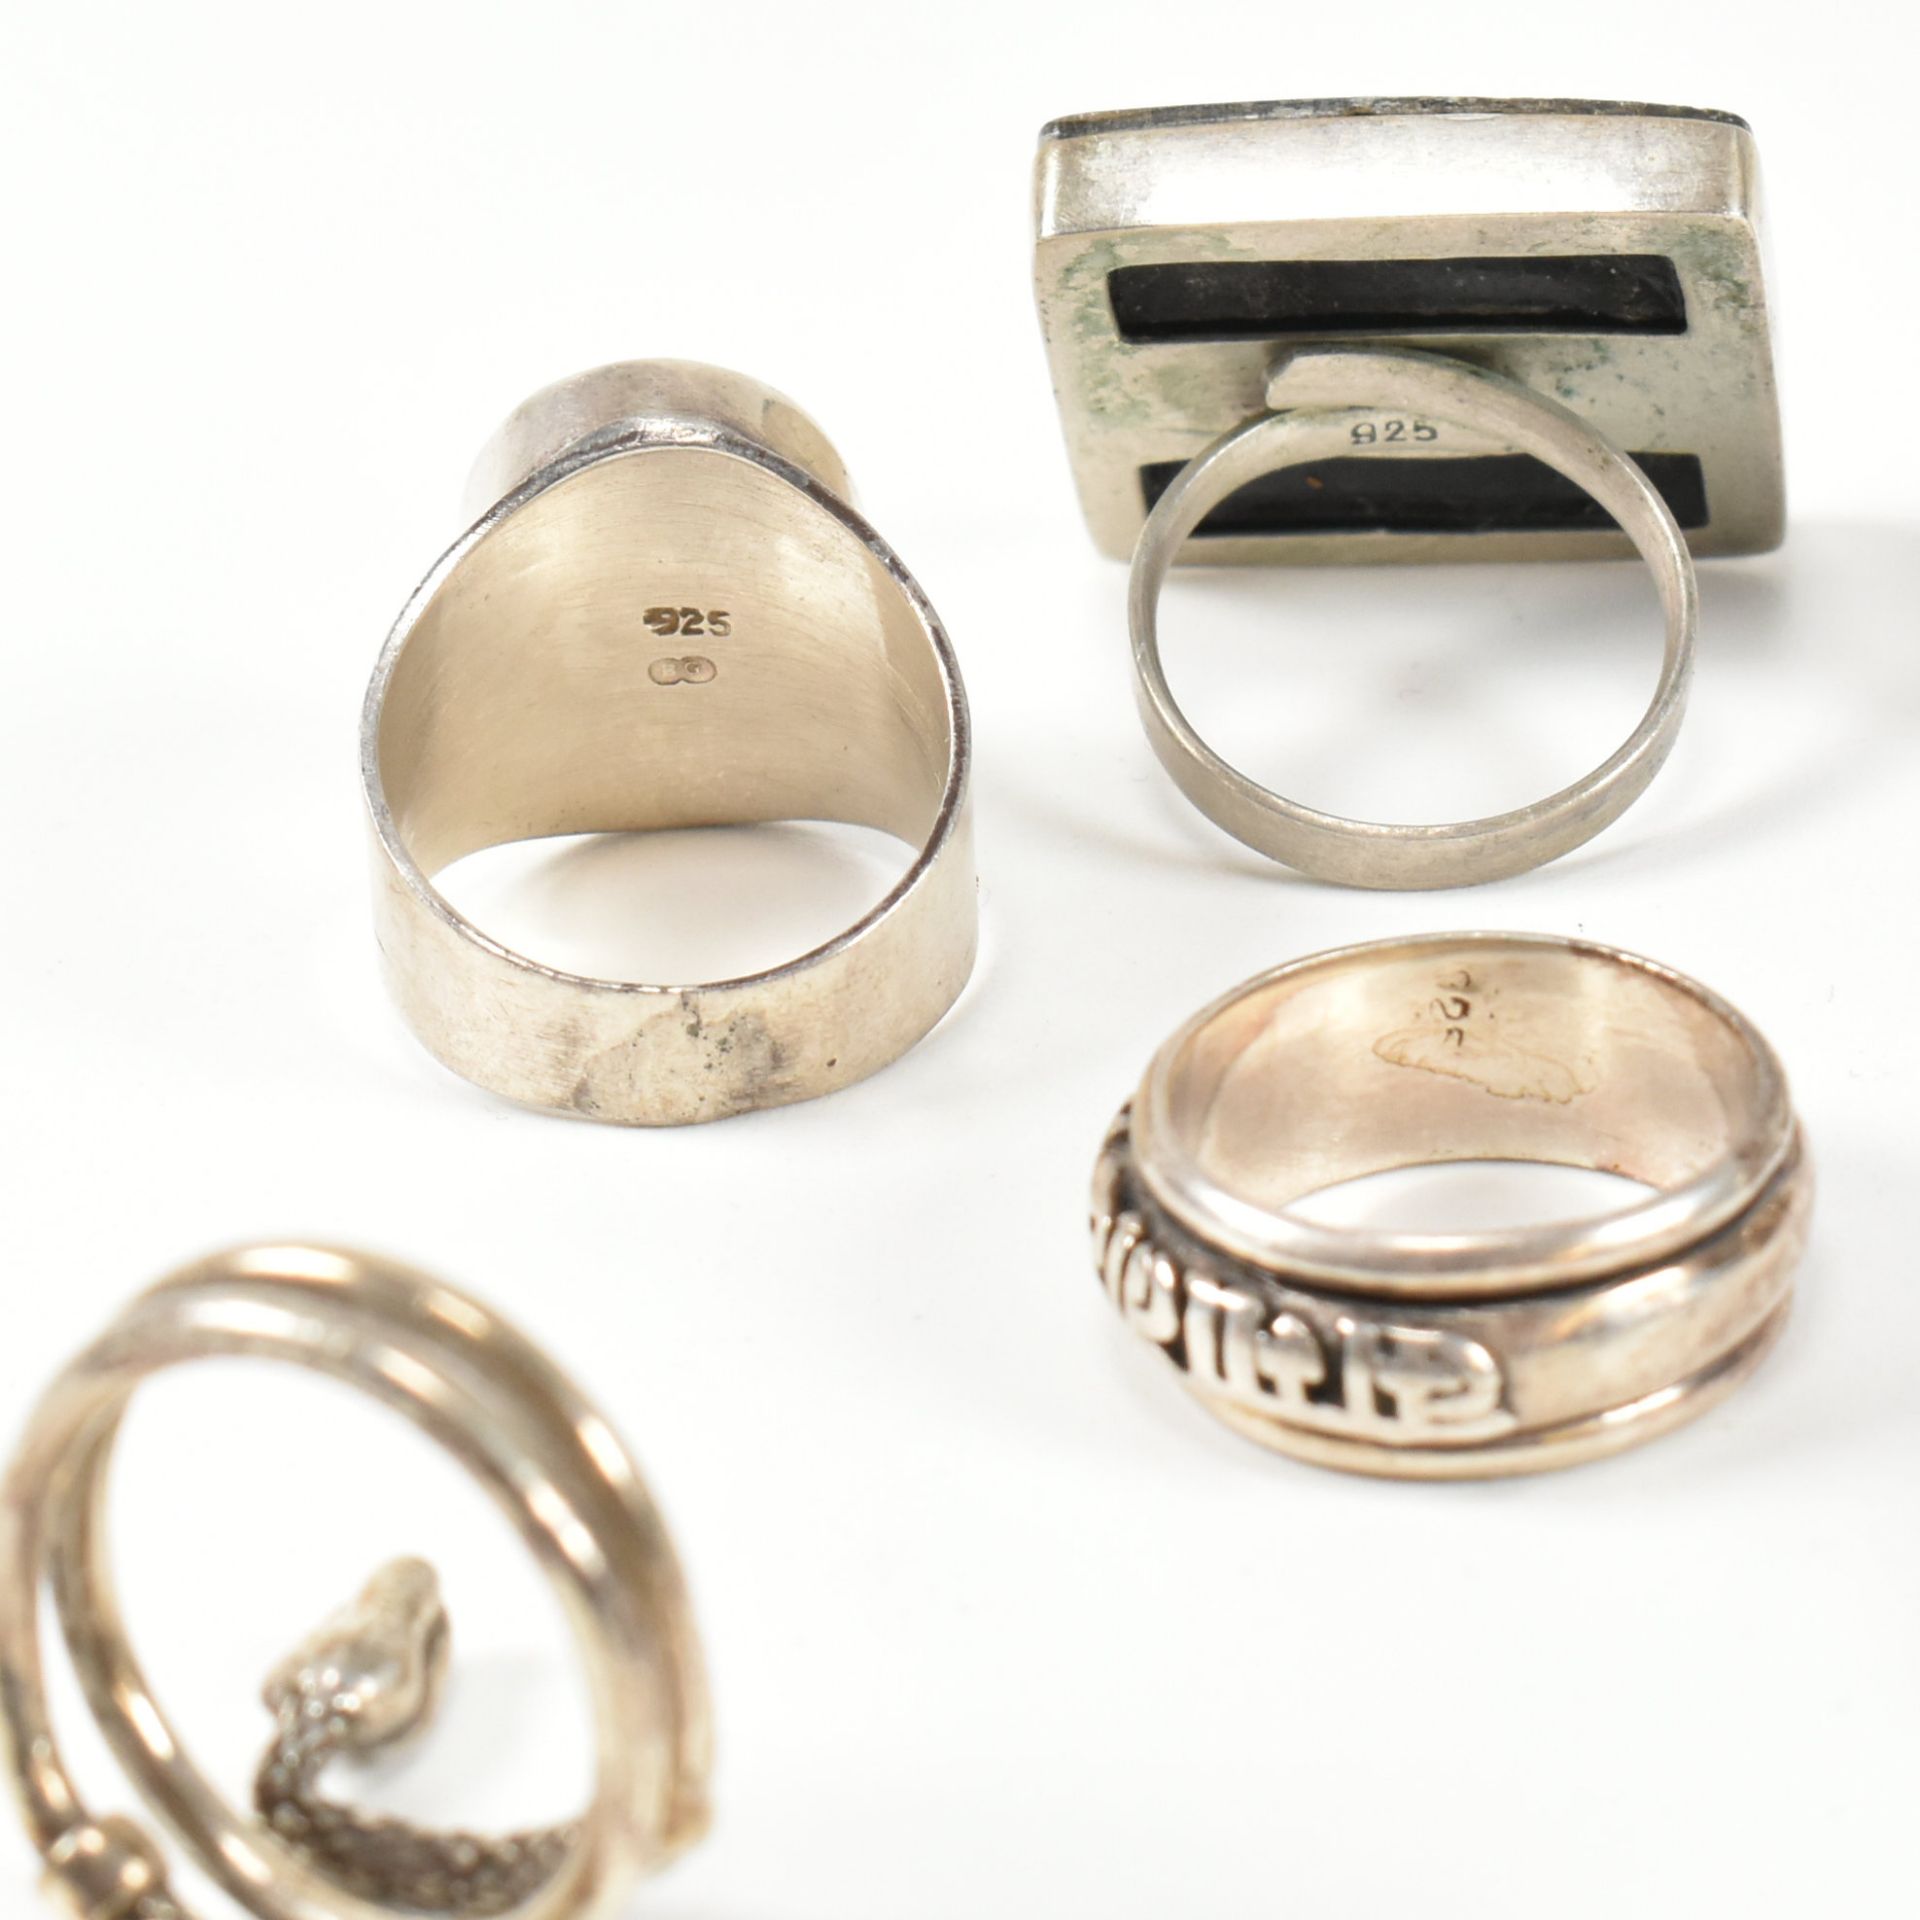 COLLECTION OF CONTEMPORARY 925 SILVER RINGS - Image 6 of 7